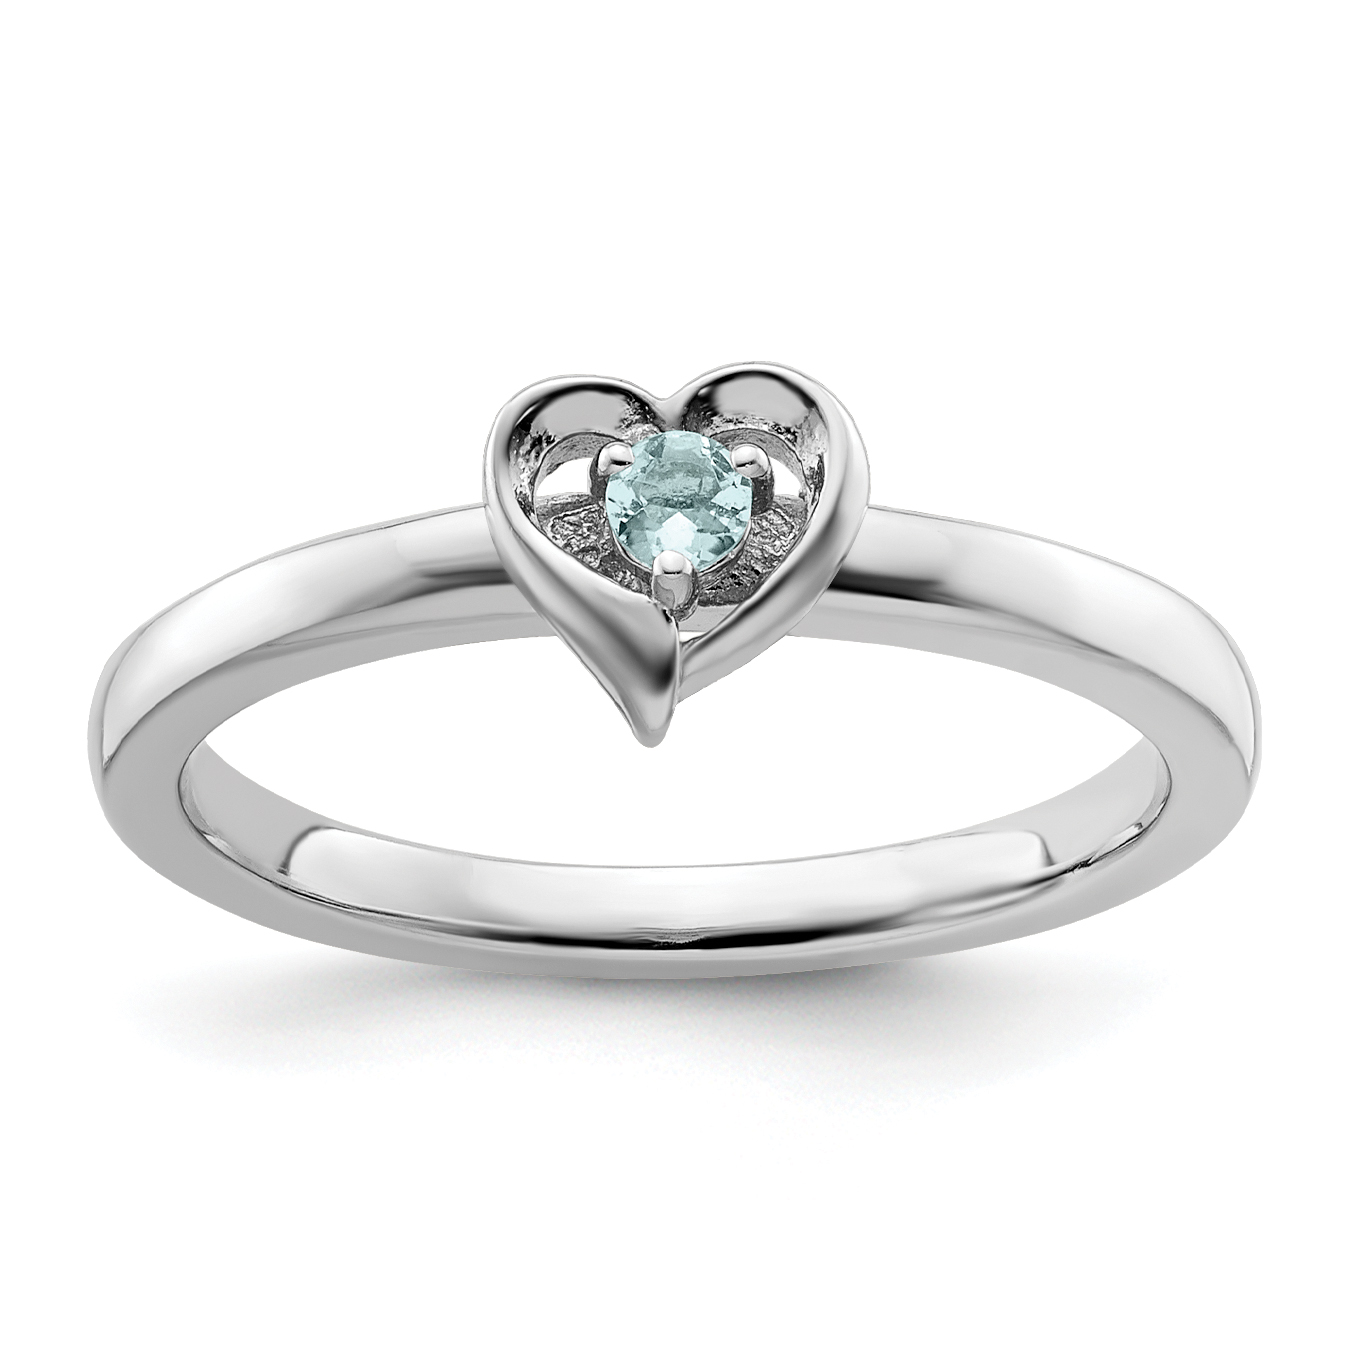 Stackable Expressions Sterling Silver Stackable Expressions Aquamarine Heart Ring